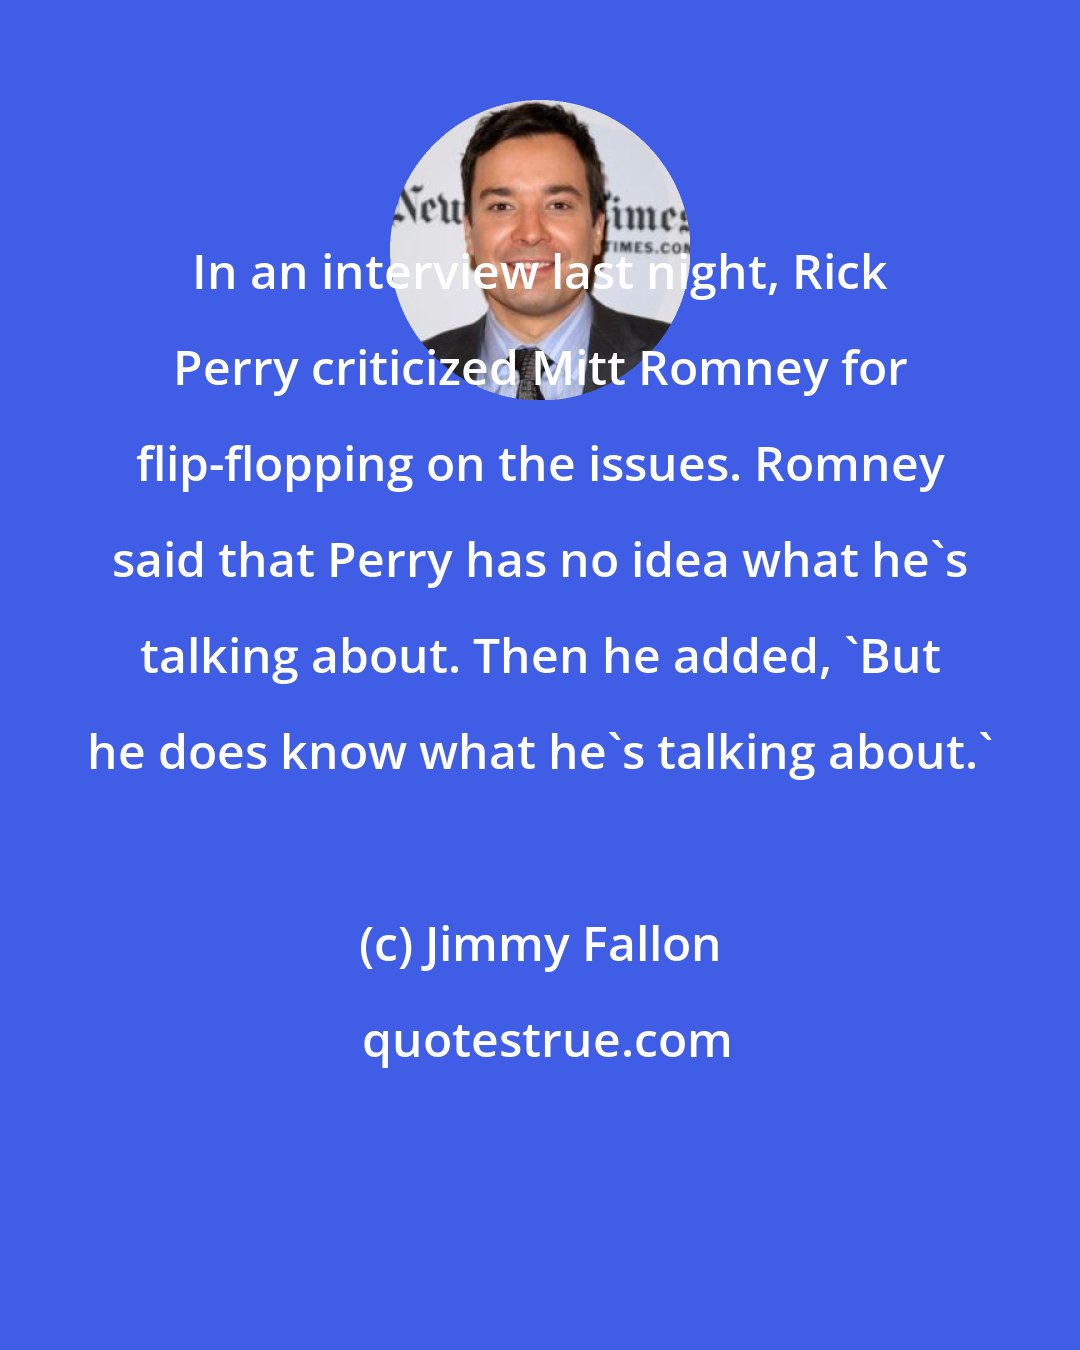 Jimmy Fallon: In an interview last night, Rick Perry criticized Mitt Romney for flip-flopping on the issues. Romney said that Perry has no idea what he's talking about. Then he added, 'But he does know what he's talking about.'